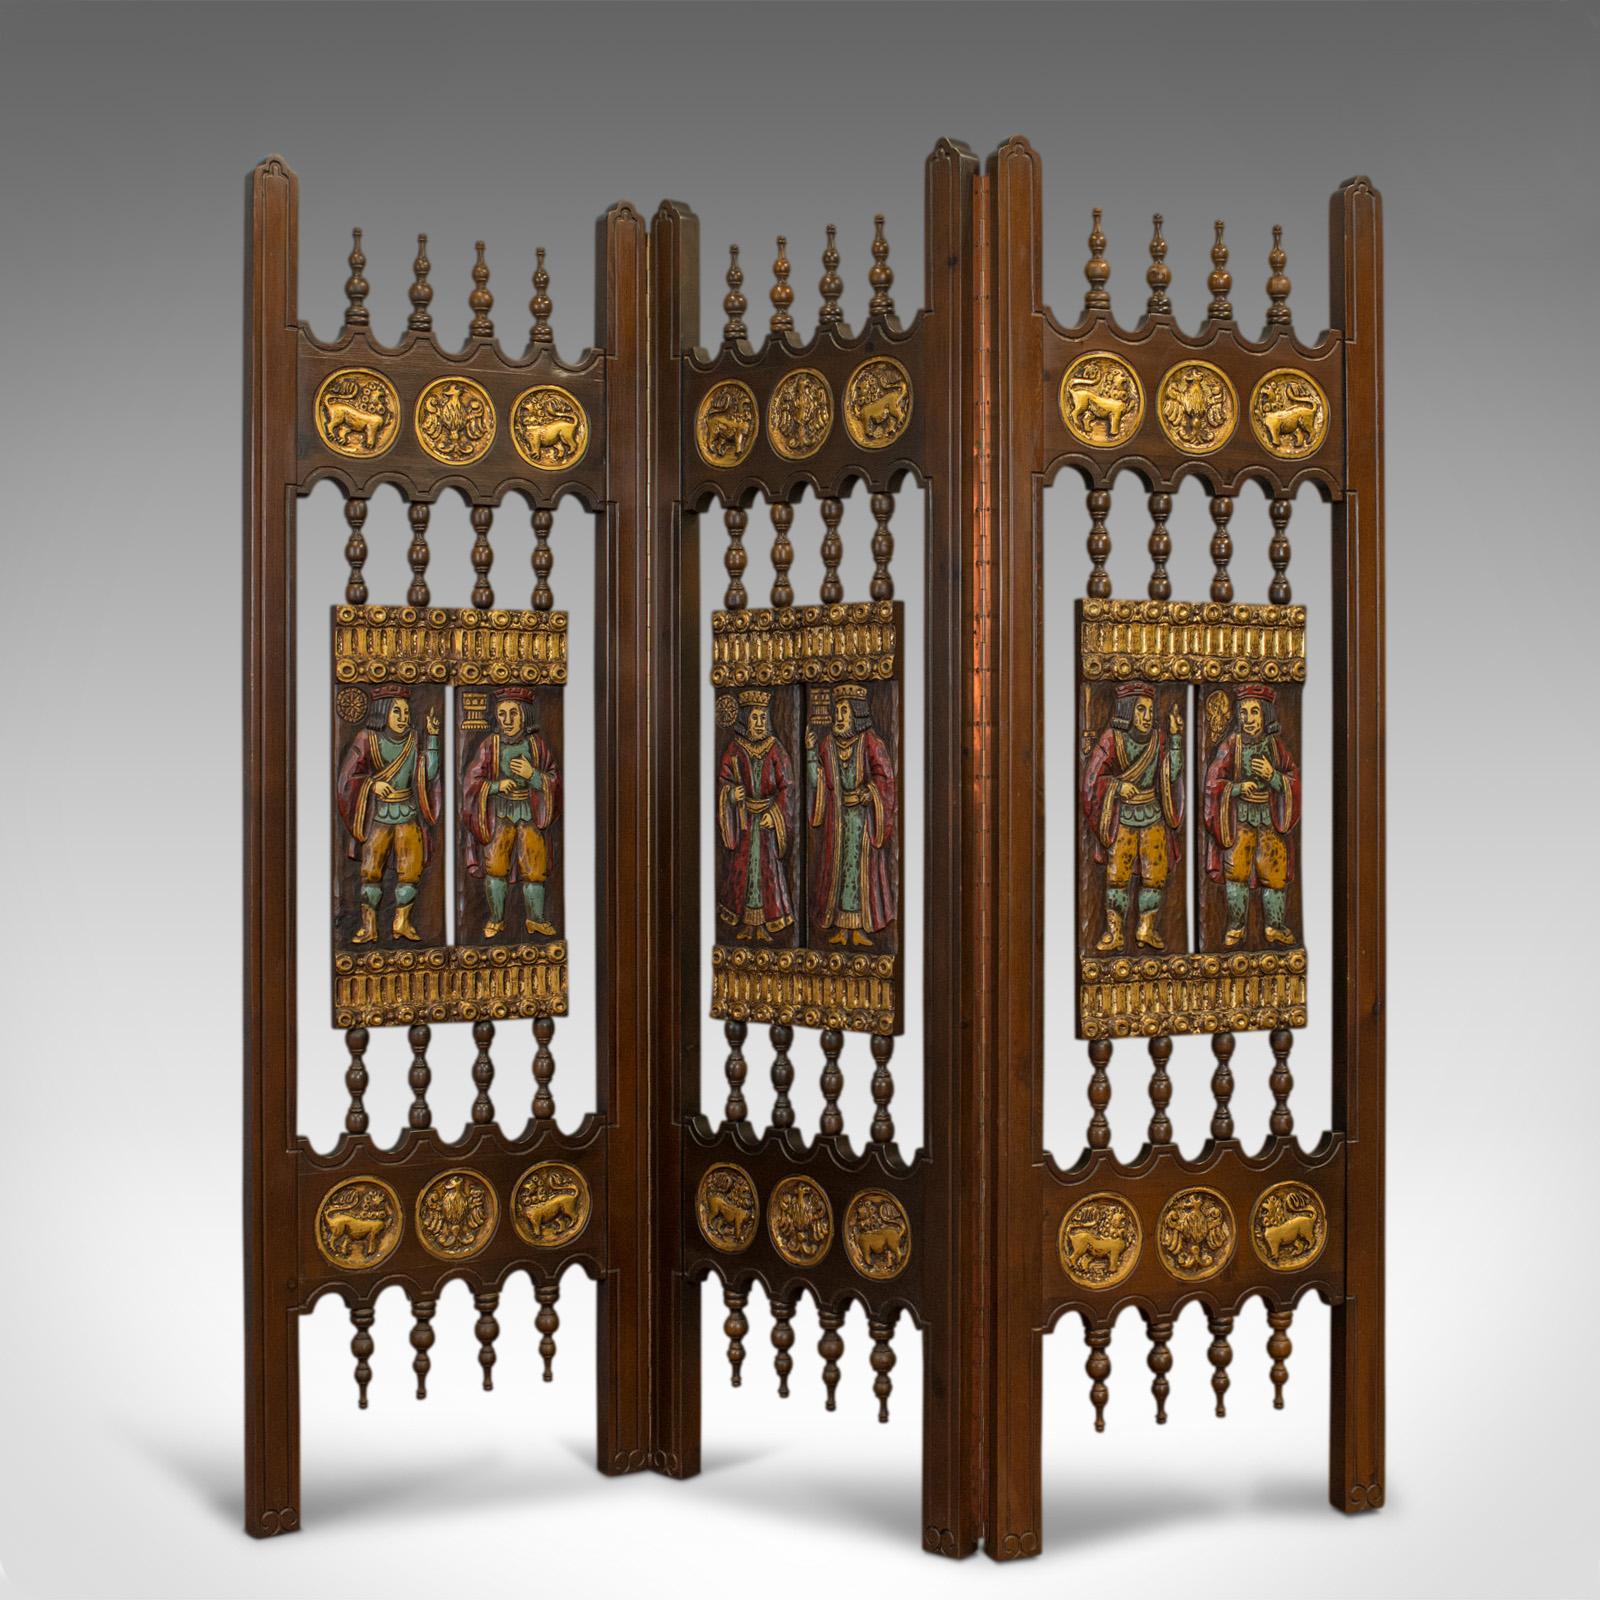 This is a vintage three-fold screen. A painted, French, folding room-divider in the medieval taste, crafted in the mid-20th century.

Fine ornate carved detail, painted panels and gilt highlights
In superb original condition with a desirable aged